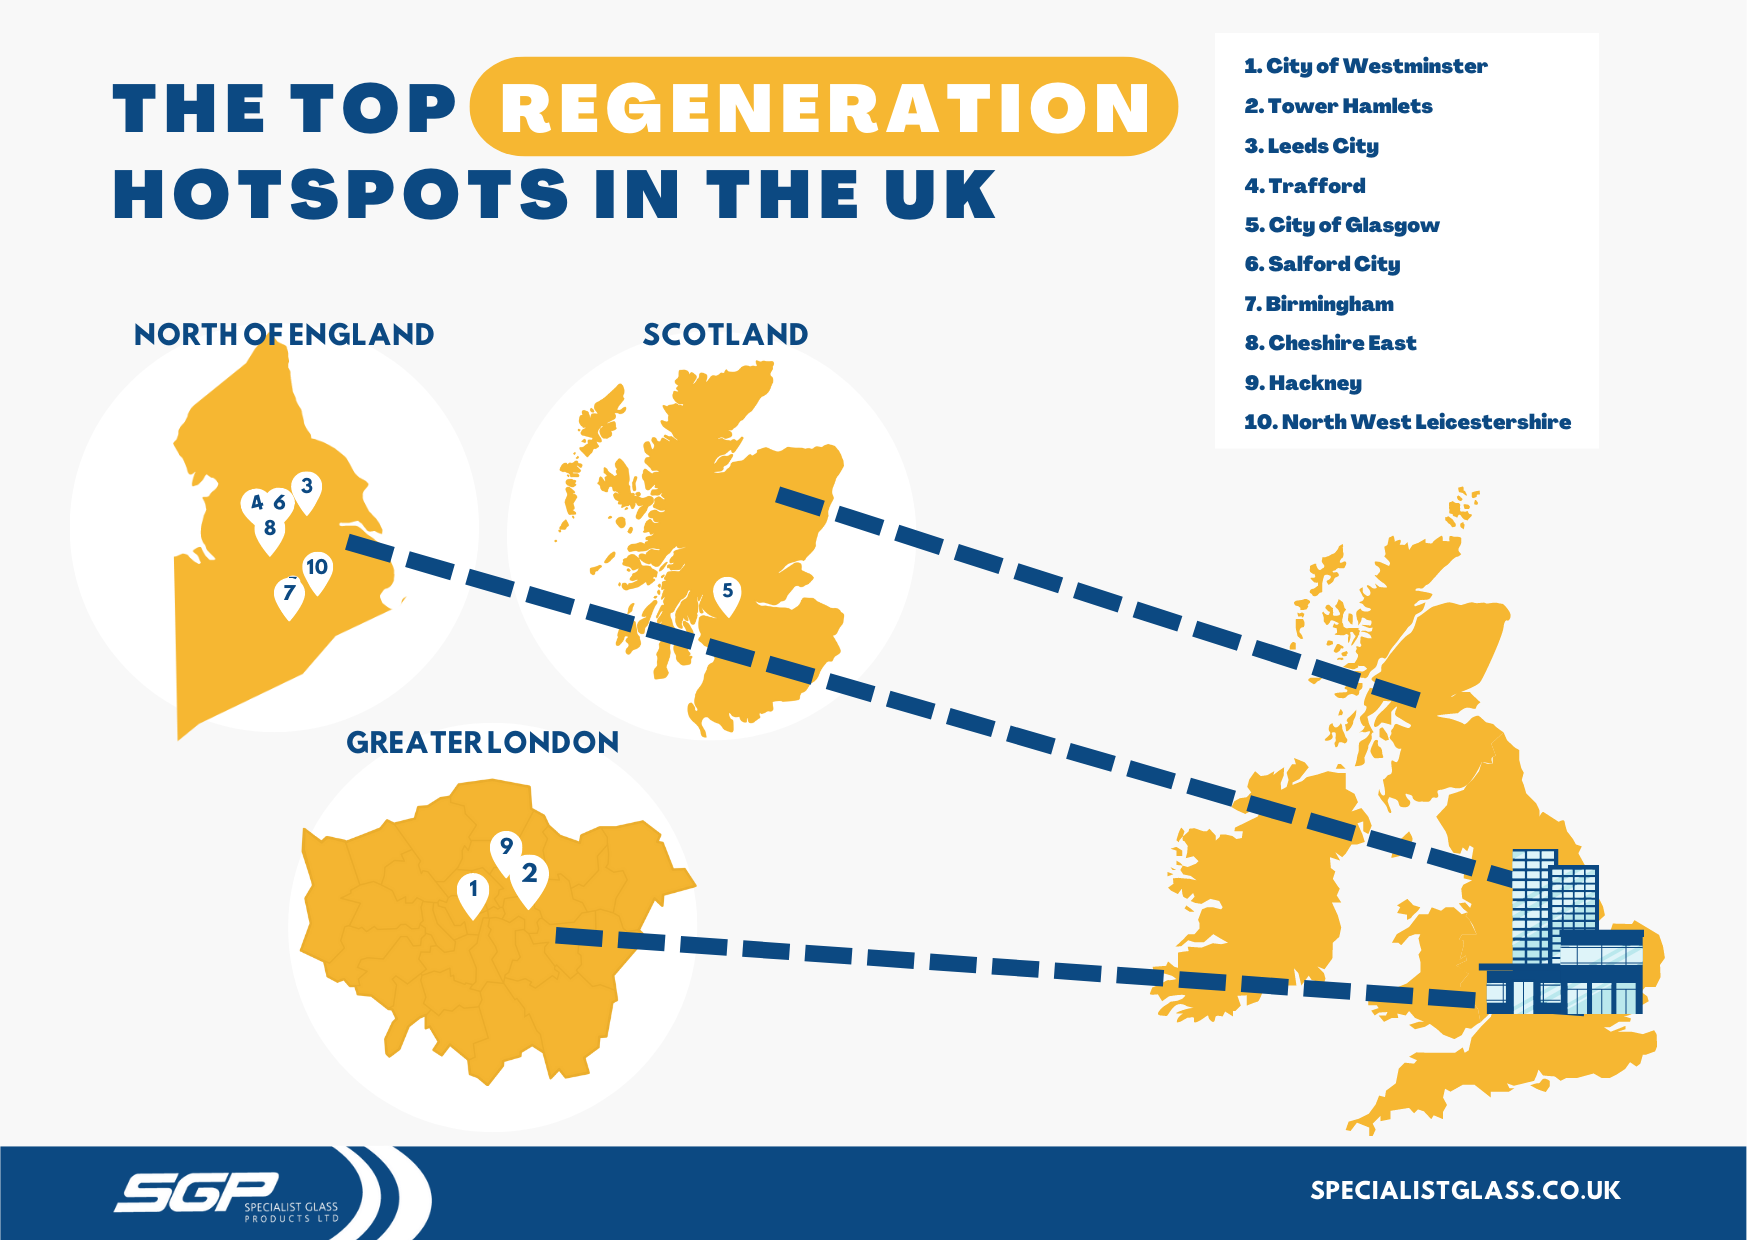 REVEALED: The hottest spots for regeneration in the UK